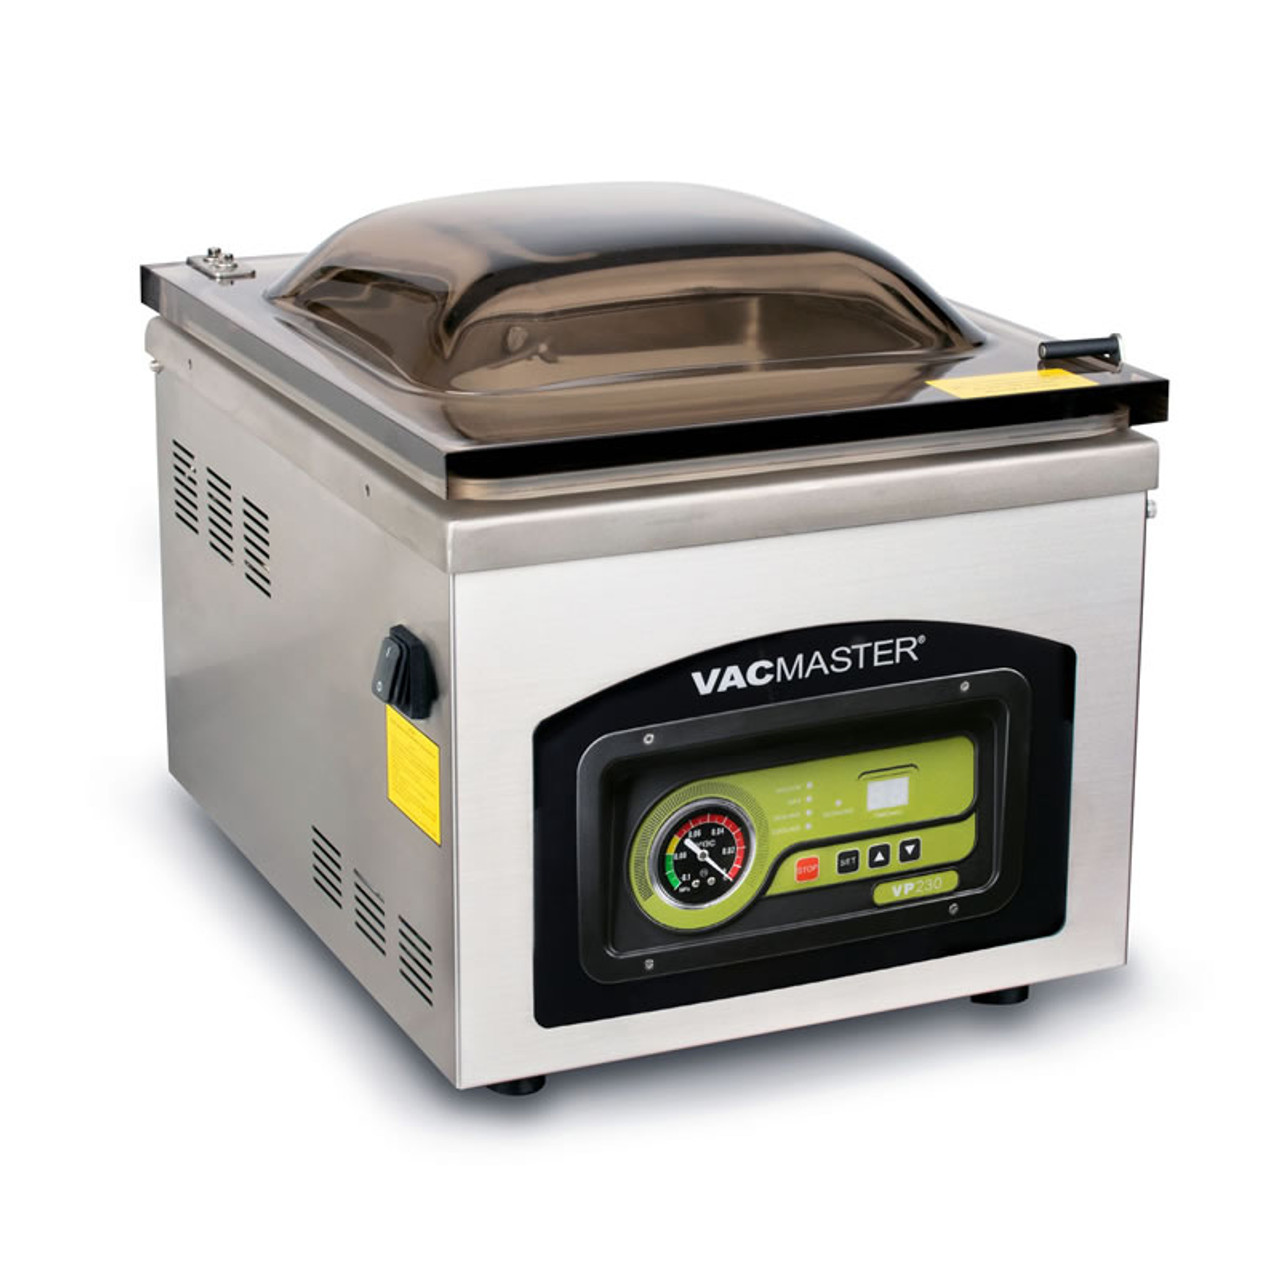 Waring Commercial Chamber Vacuum Sealing System